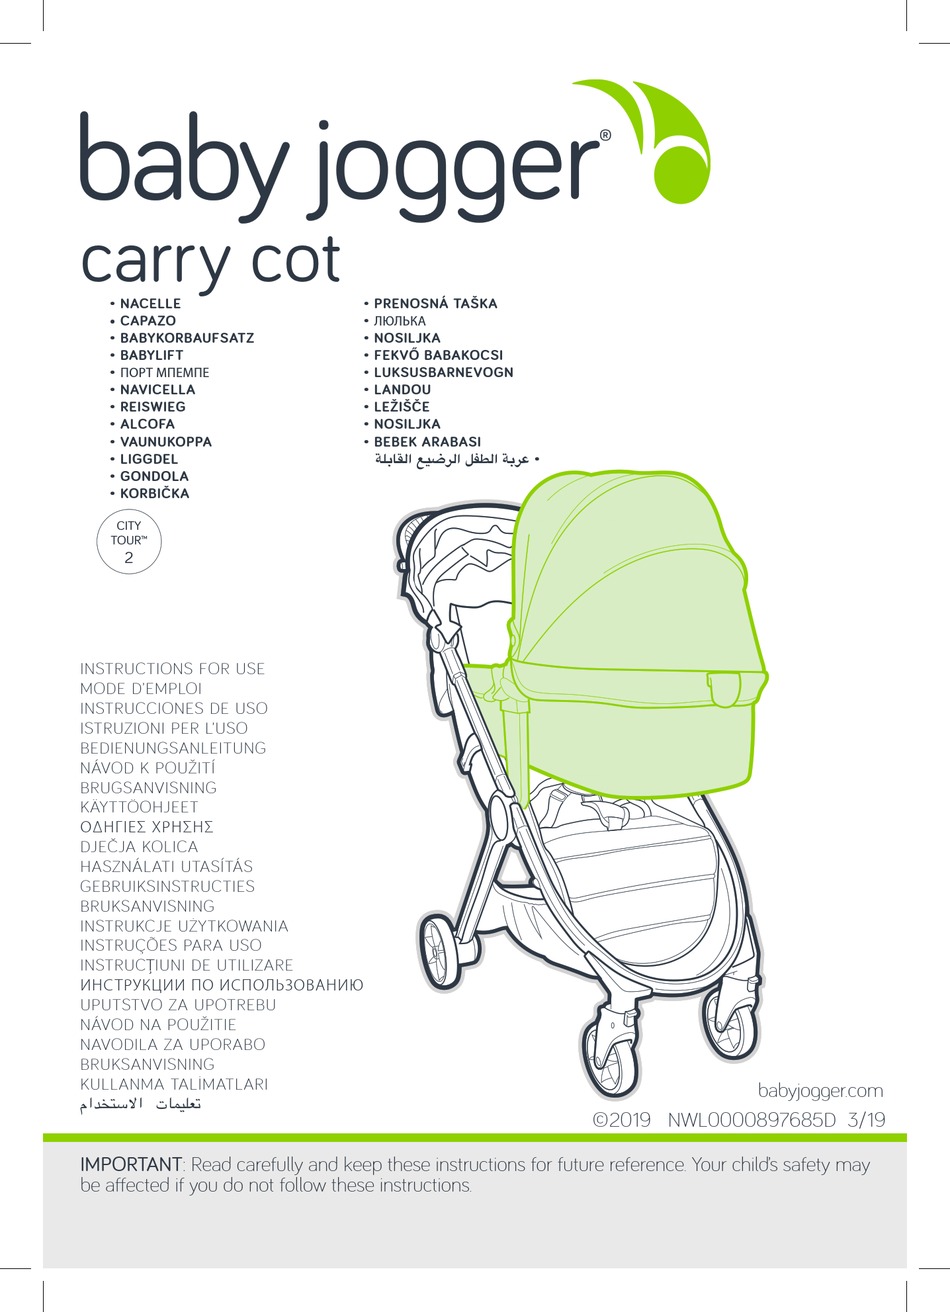 BABY JOGGER CITY 2 INSTRUCTIONS FOR MANUAL Pdf Download | ManualsLib